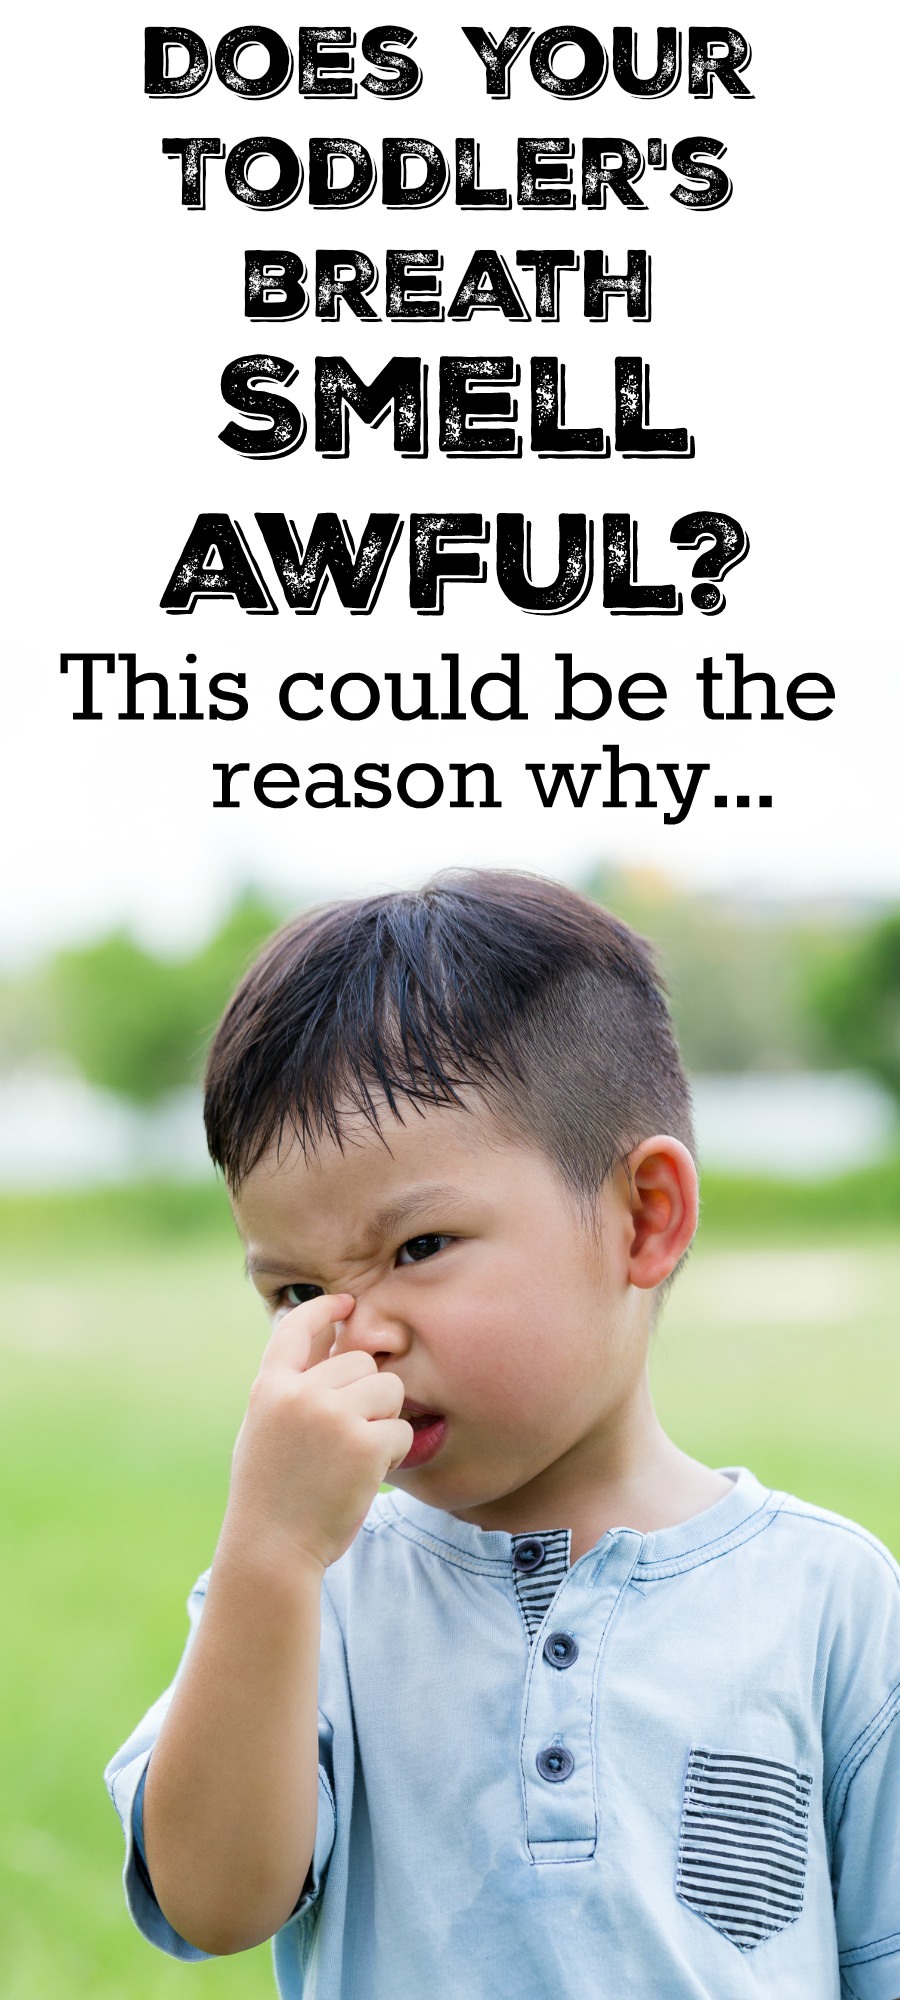 Why does my son's breath smell like feces?